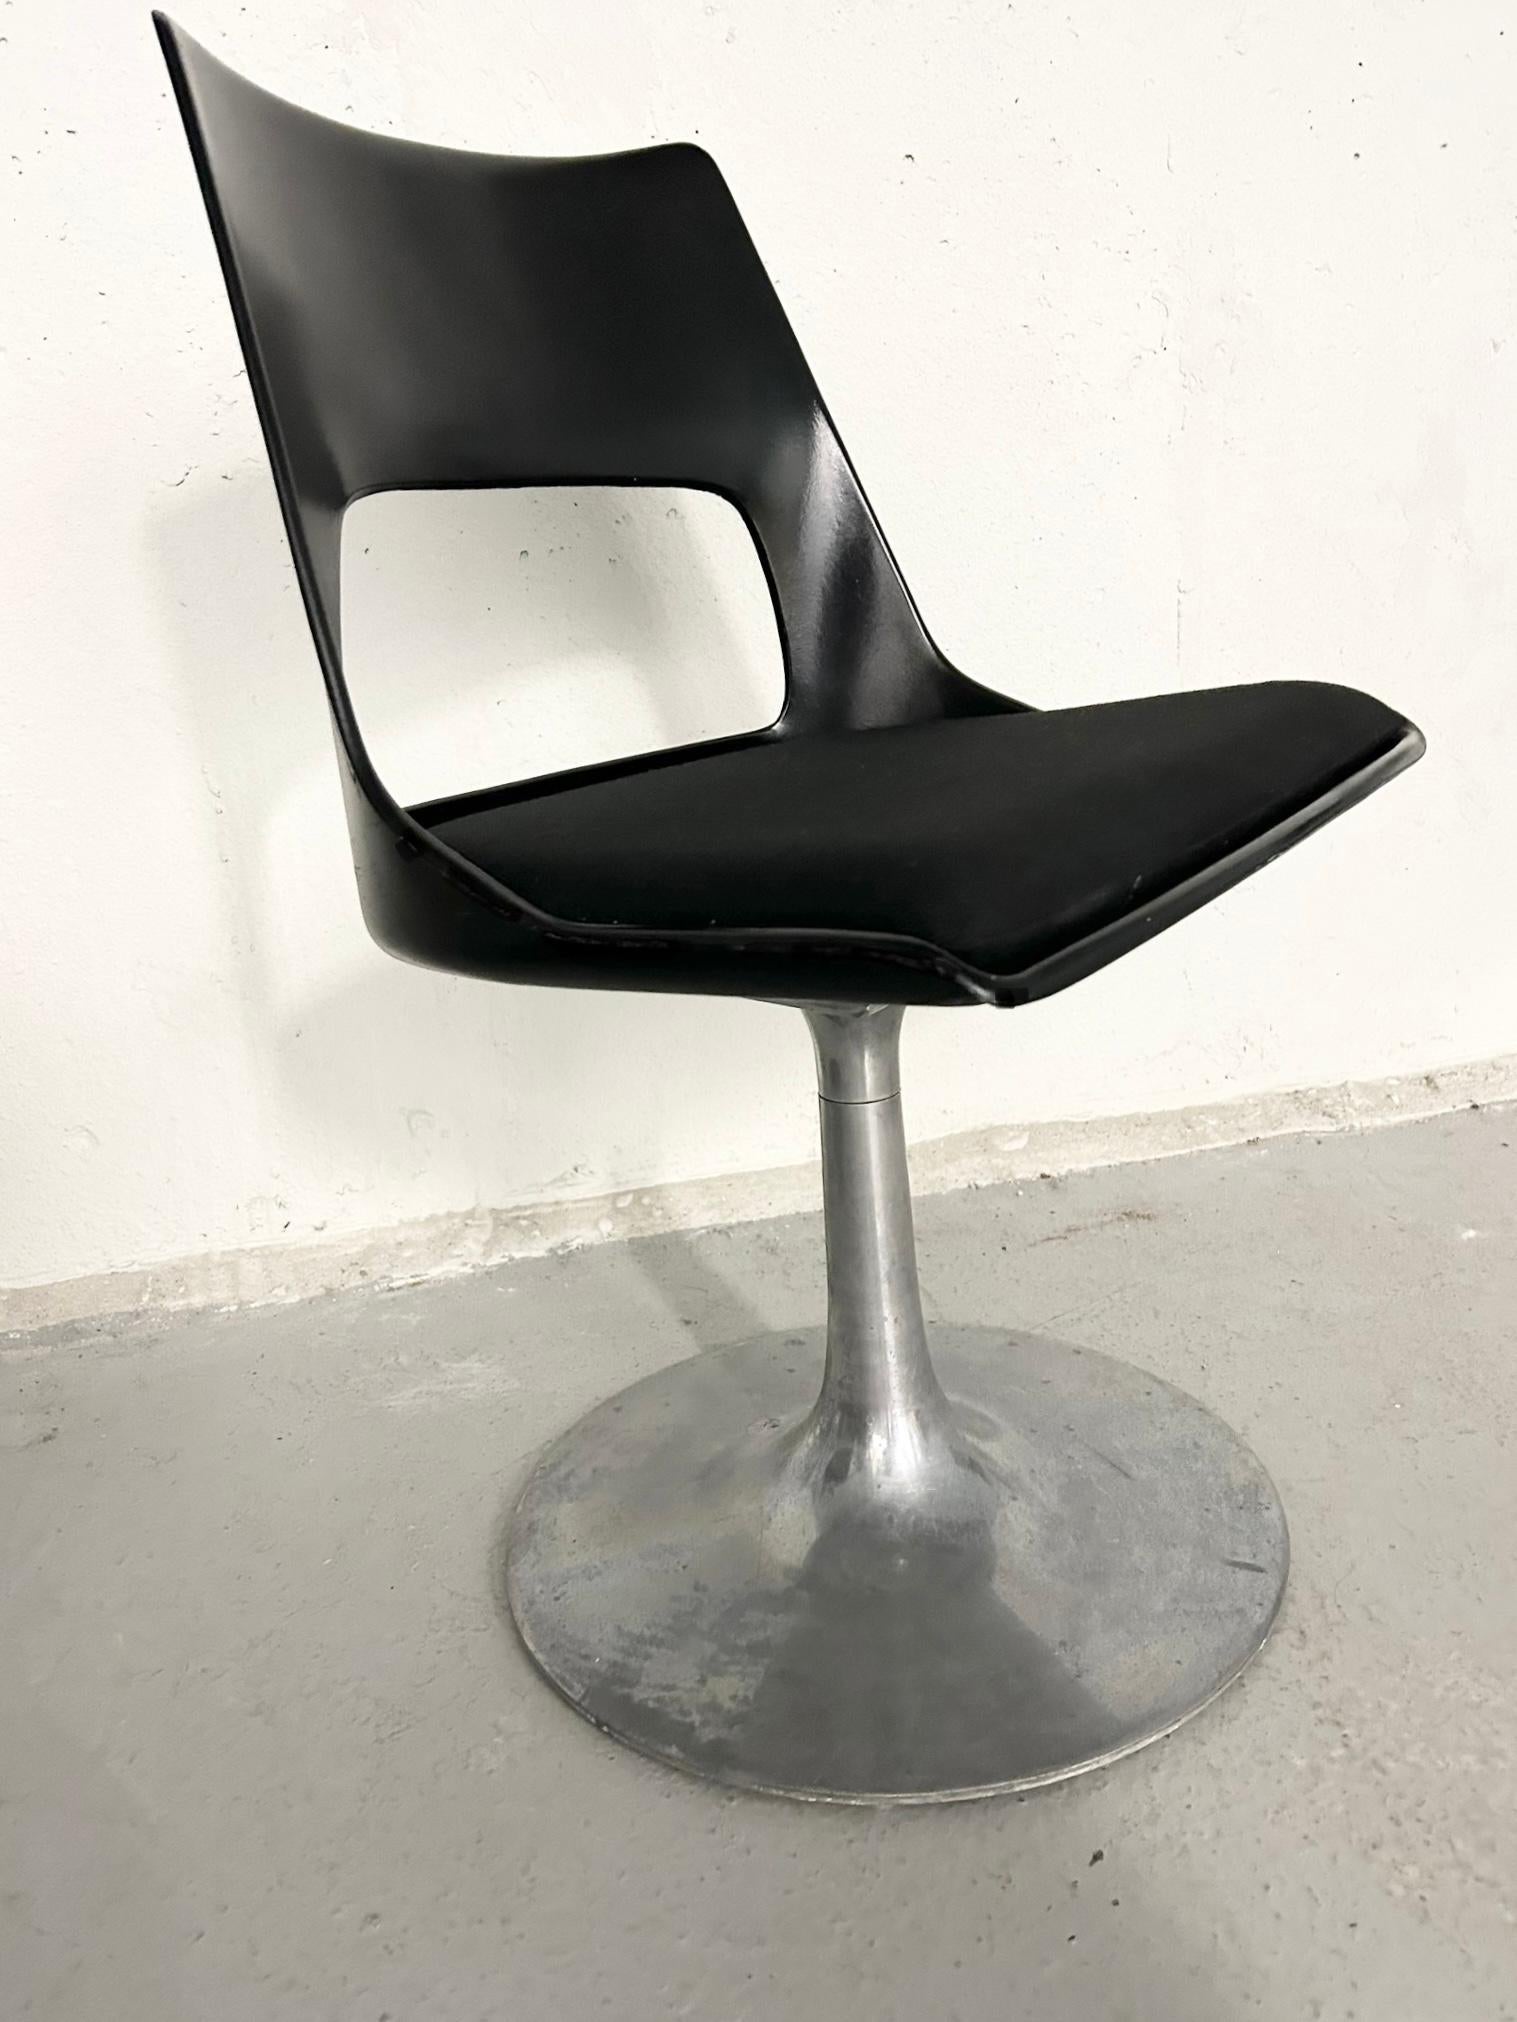 Only 1 chair available - Vintage swivel chair by Krueger - 1960s. Has black upholstered seat cushion and aluminum base. Normal vintage wear. Base has some oxidation.